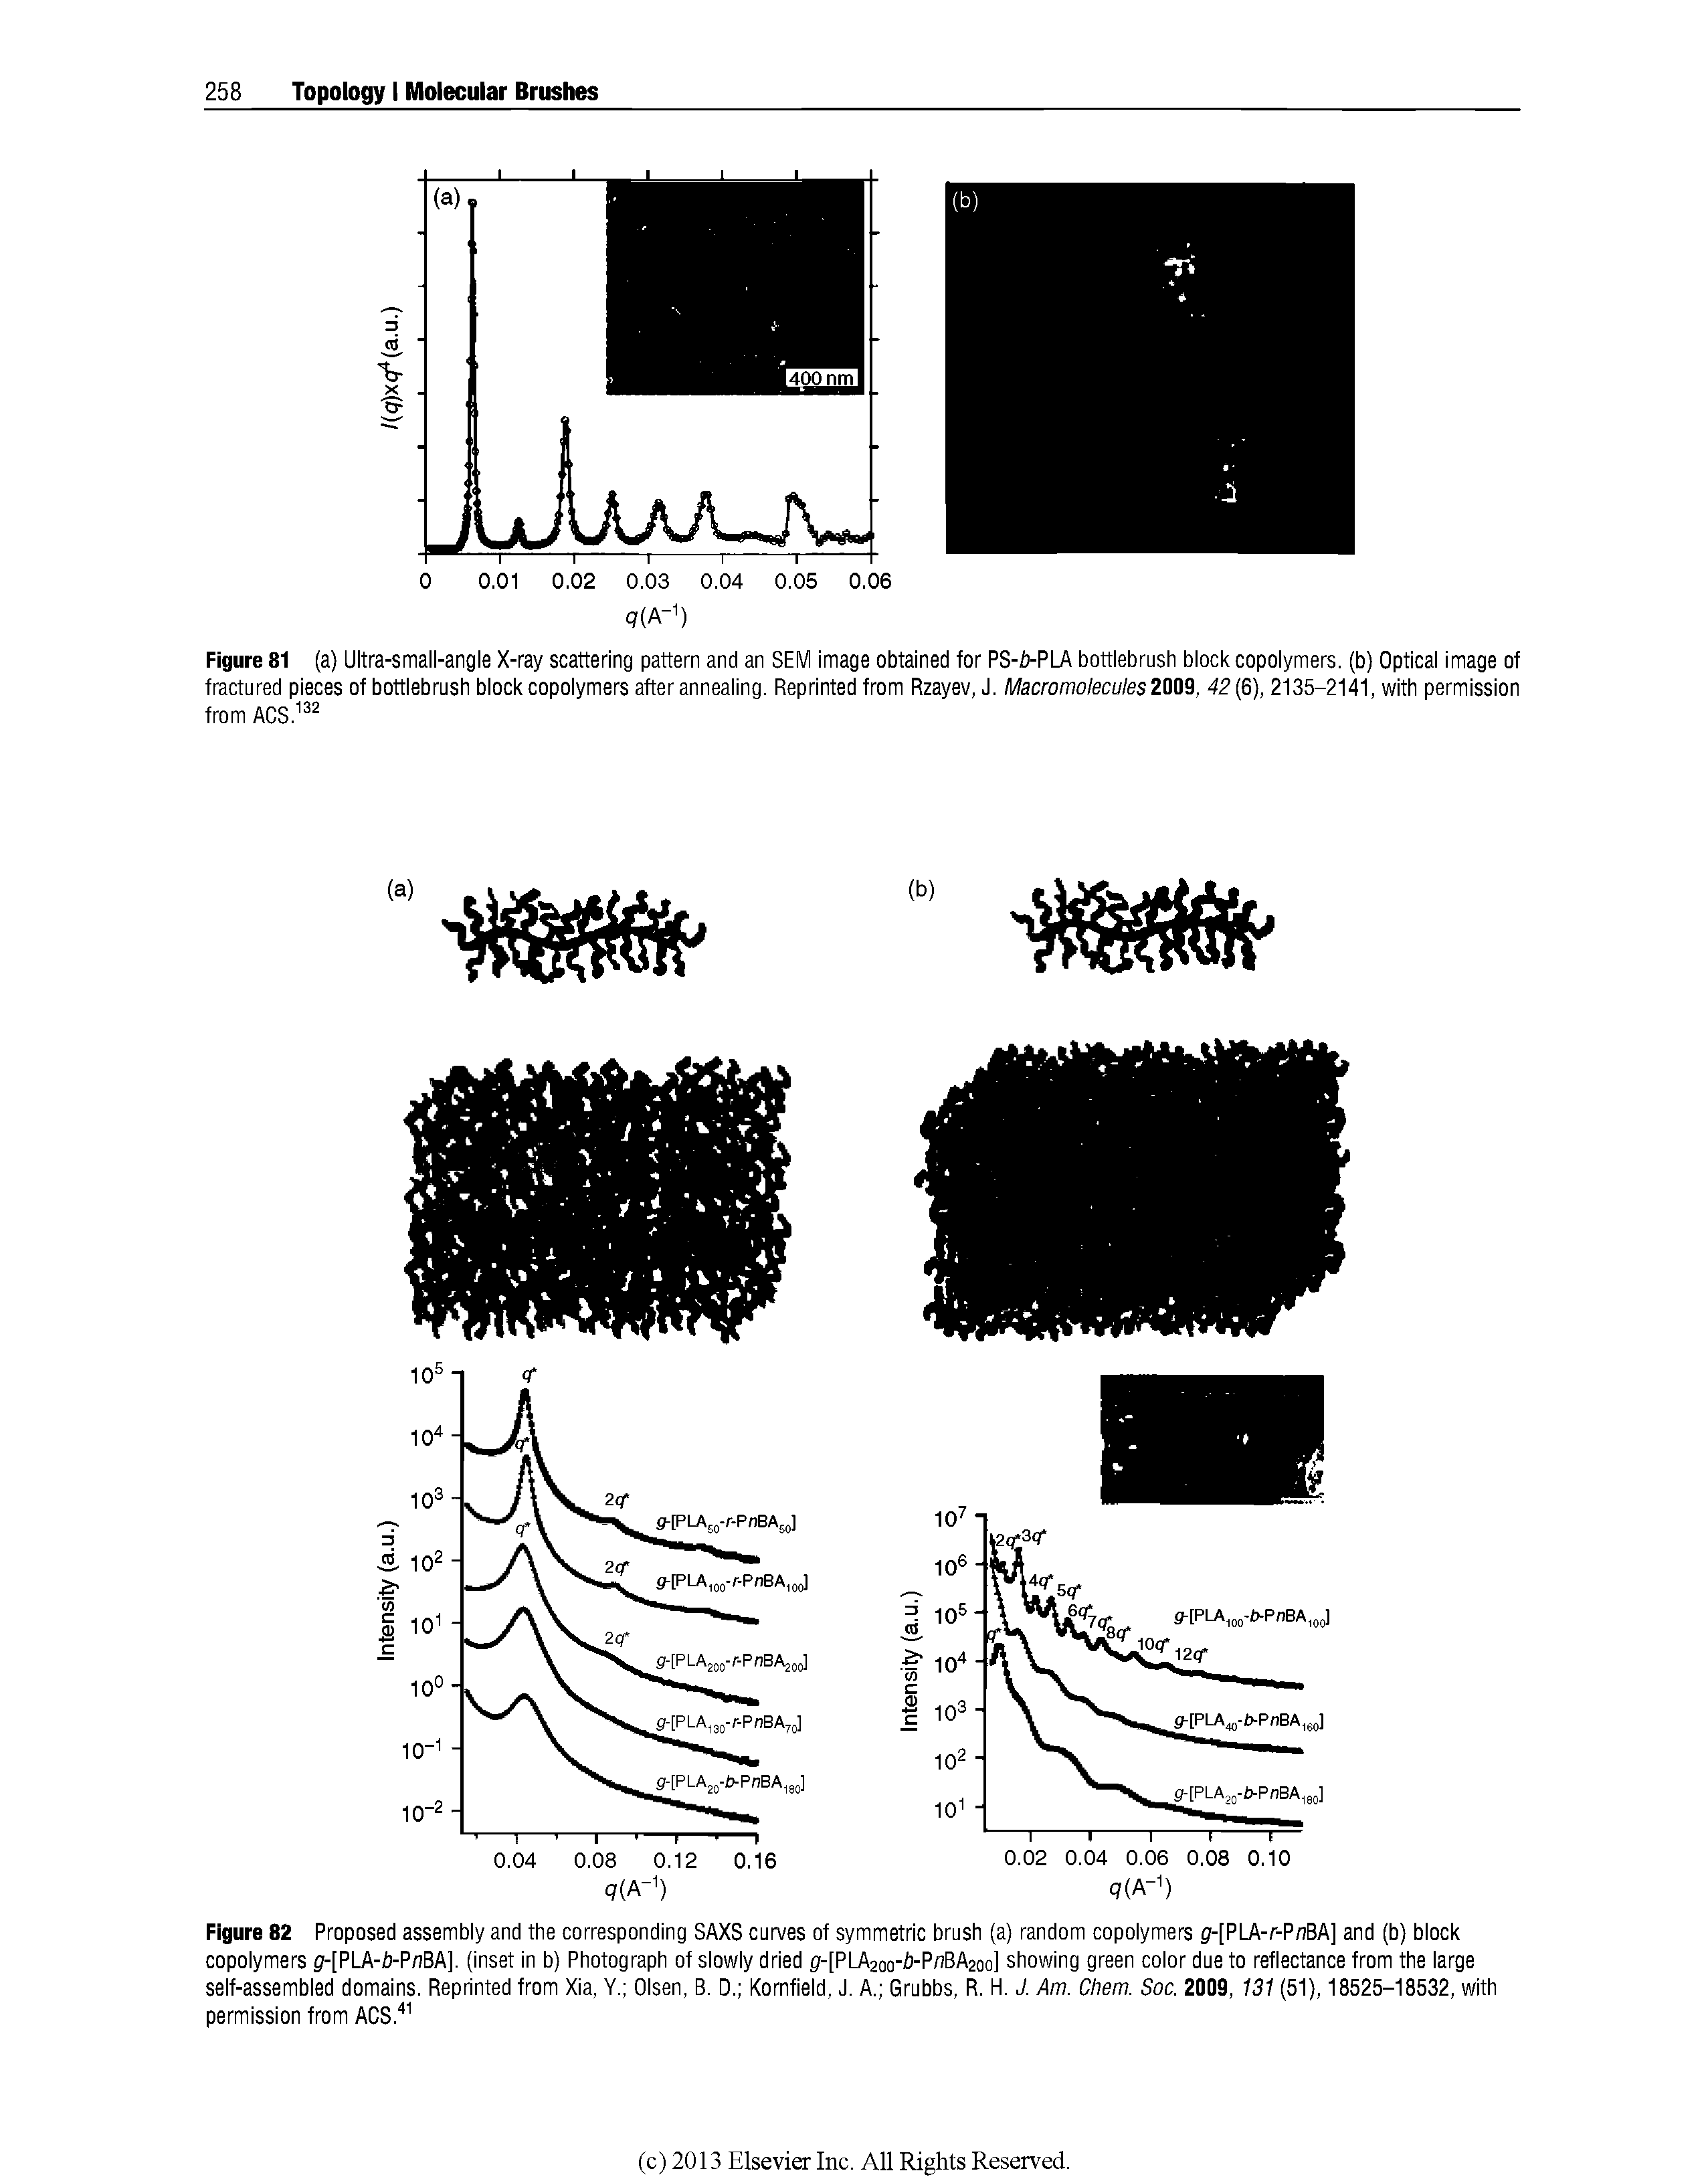 Figure 82 Proposed assembly and the corresponding SAXS curves of symmetric brush (a) random copolymers g(-[PLA-r-P/iBA] and (b) block copolymers g(-[PLA-b-P/iBA]. (inset in b) Photograph of slowly dried 0-[PLA2oo-i-PftBA2oo] showing green color due to reflectance from the large self-assembled domains. Reprinted from Xia, Y. Olsen, B. D. Kornfield, J. A. Grubbs, R. H. J. Am. Chem. Soc. 2009, 131 (51), 18525-18532, with permission from ACS. ...